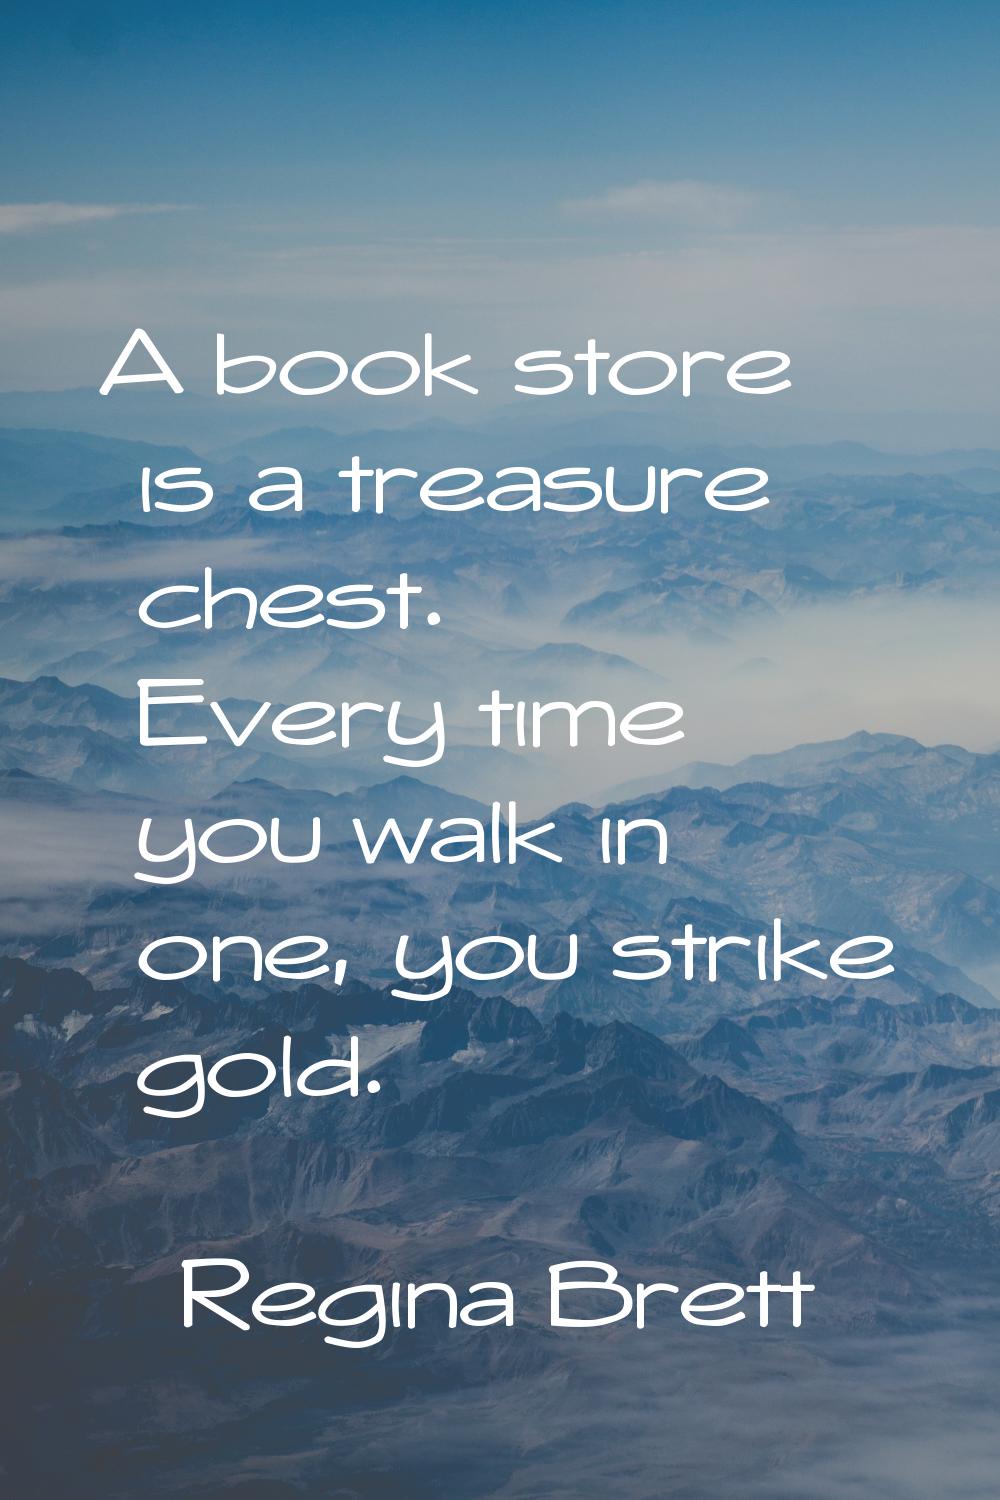 A book store is a treasure chest. Every time you walk in one, you strike gold.